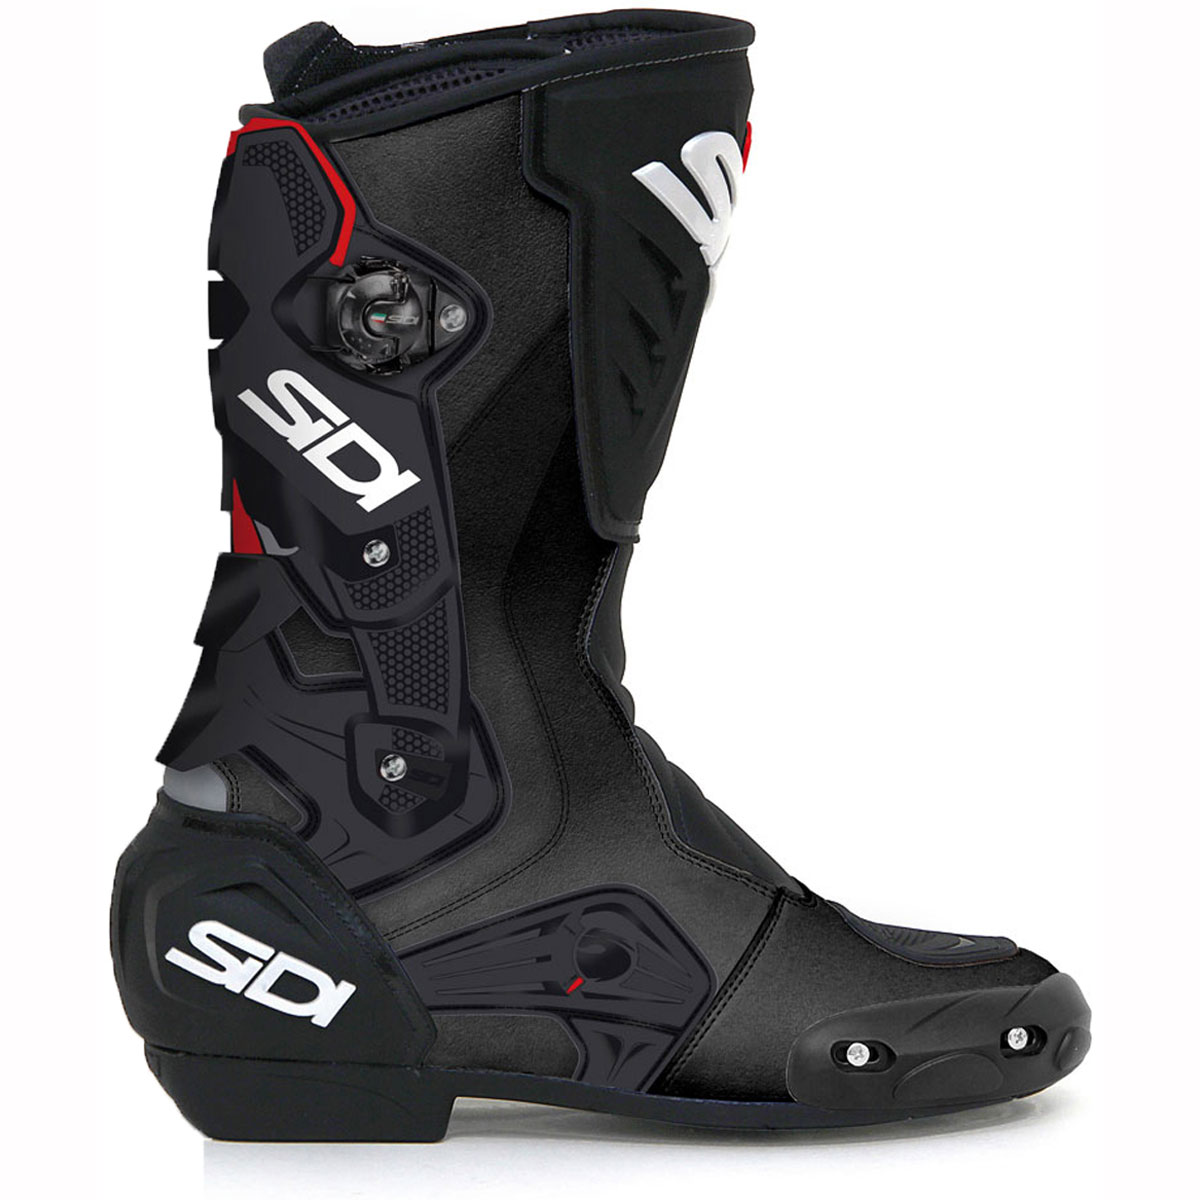 motorcycle summer boots